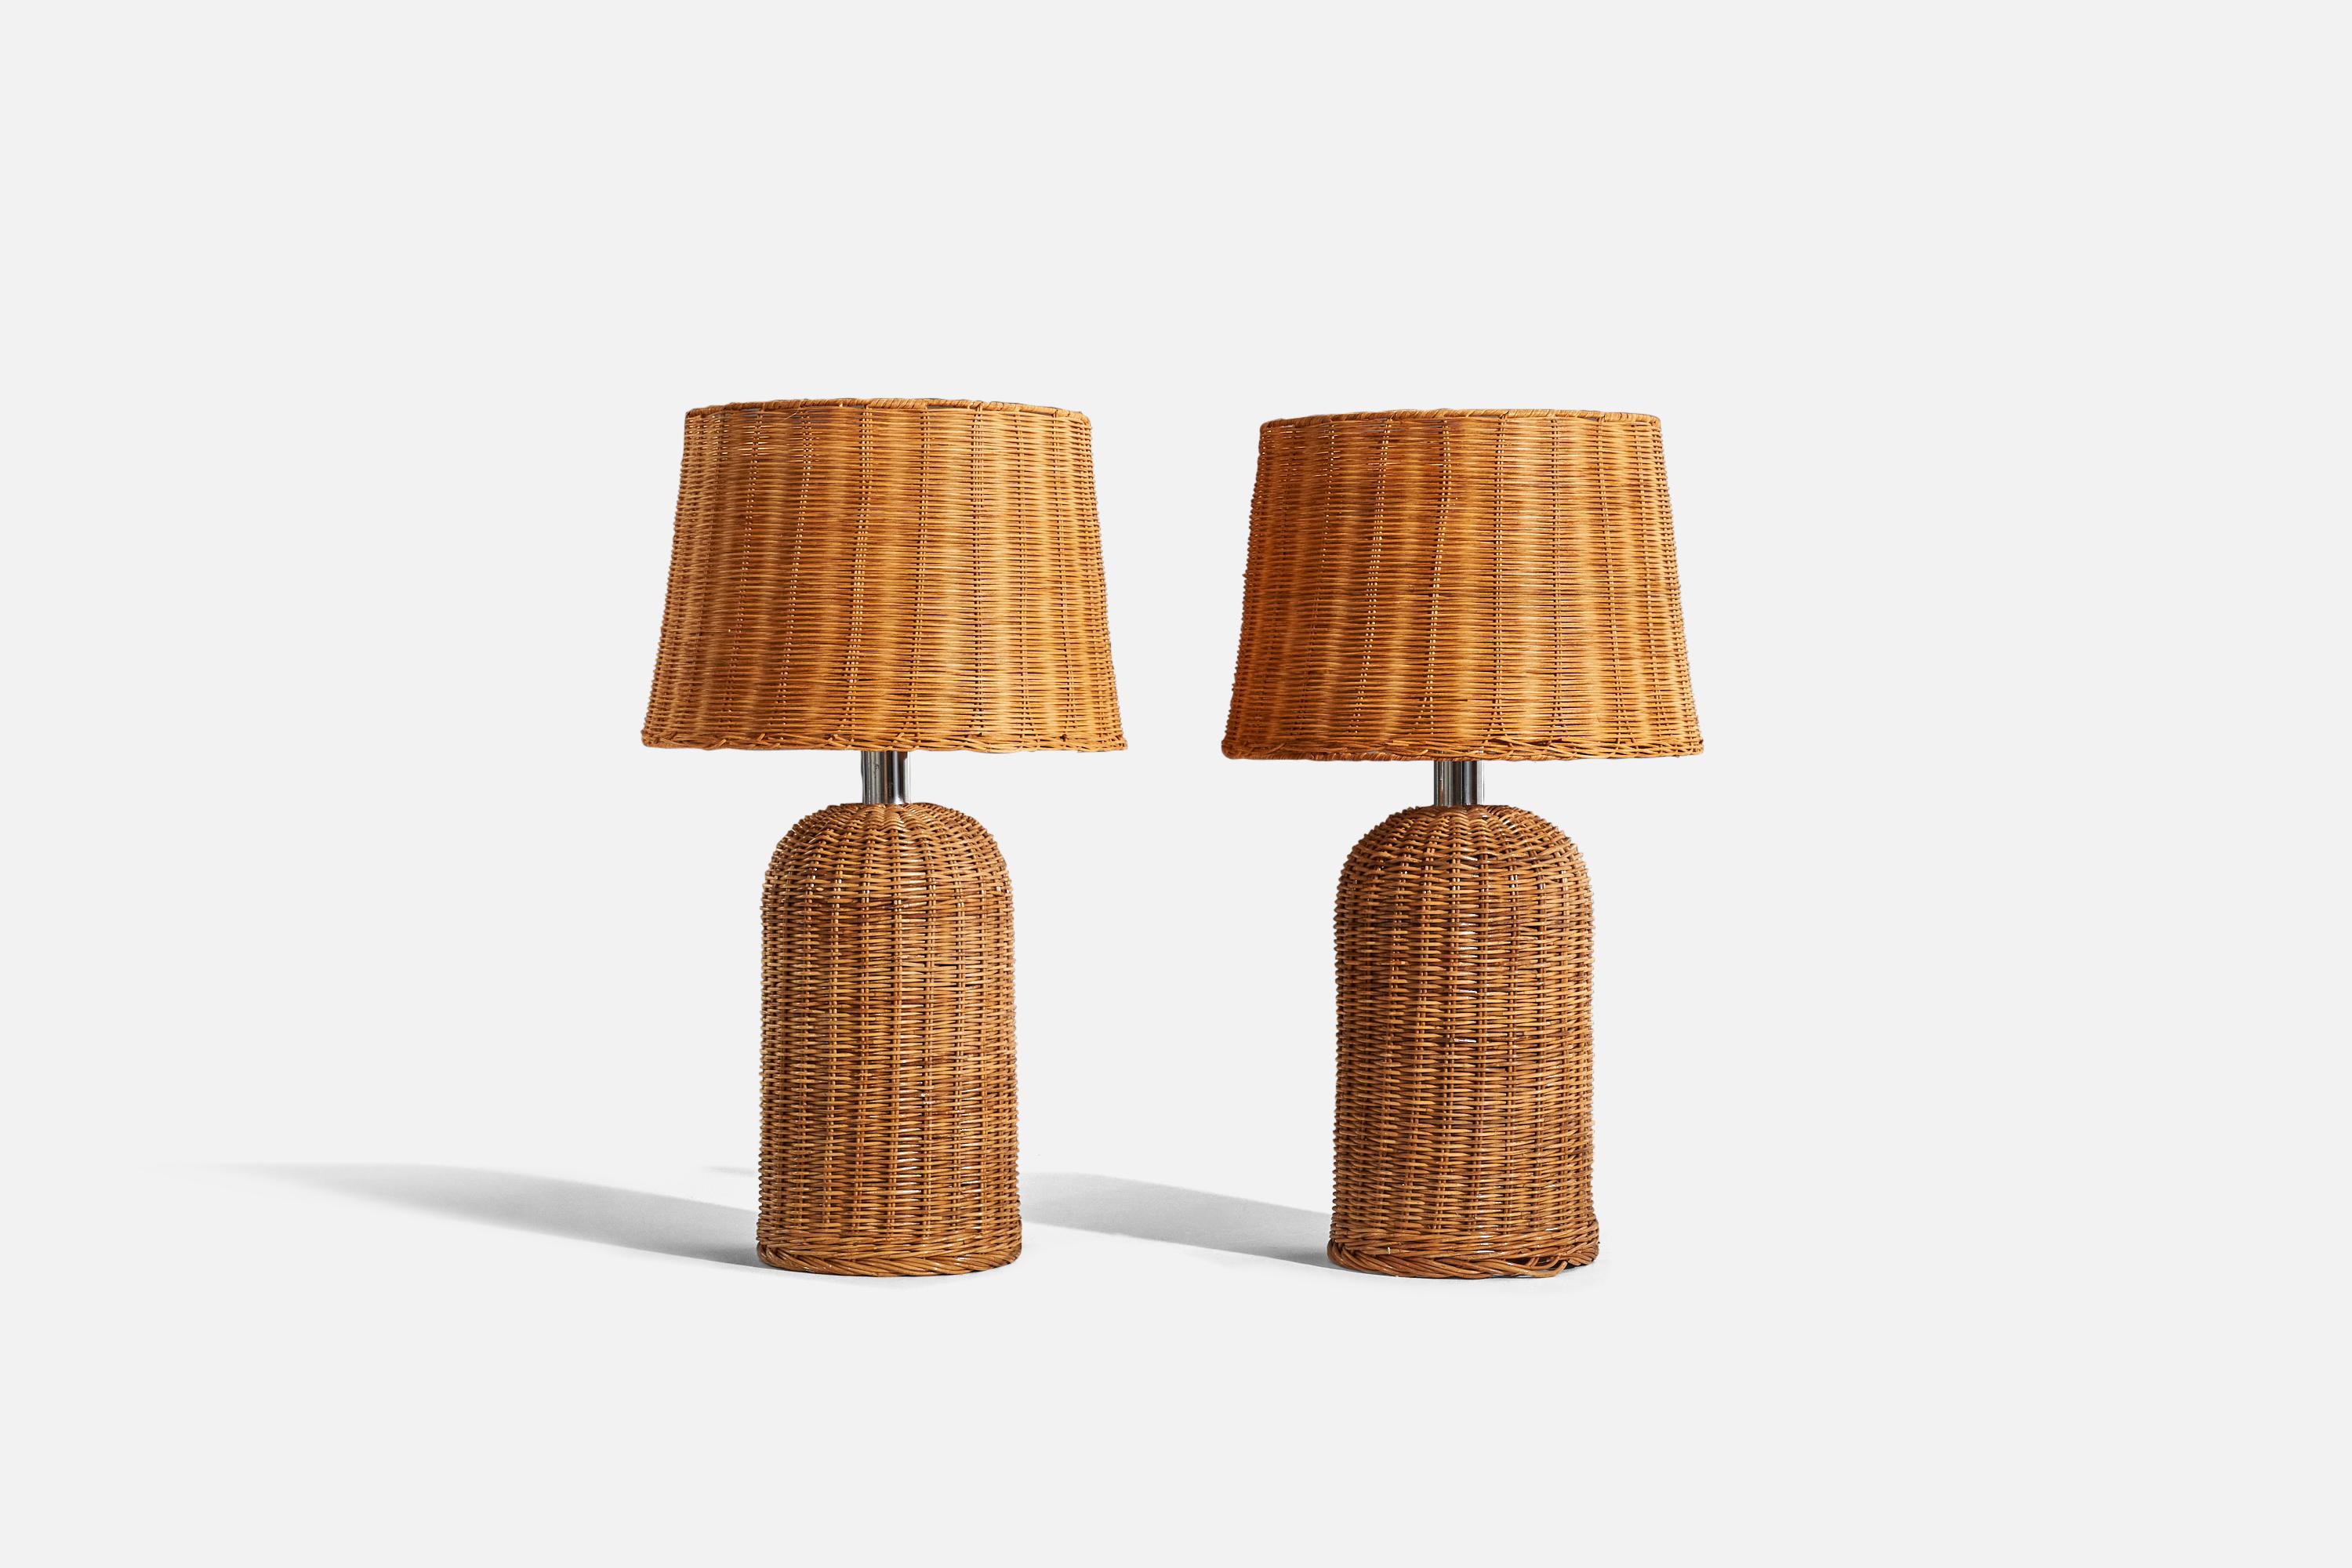 A pair of wicker table lamps designed and produced by Raymor, Italy, 1970s. 

Lampshades are replaced.

Sold with lampshades. 
Dimensions of Lamp (inches) : 22.56 x 9.25 x 9.25 (H x W x D)
Dimensions of Shade (inches) : 13.5 x 16.5 x 11.5 (T x